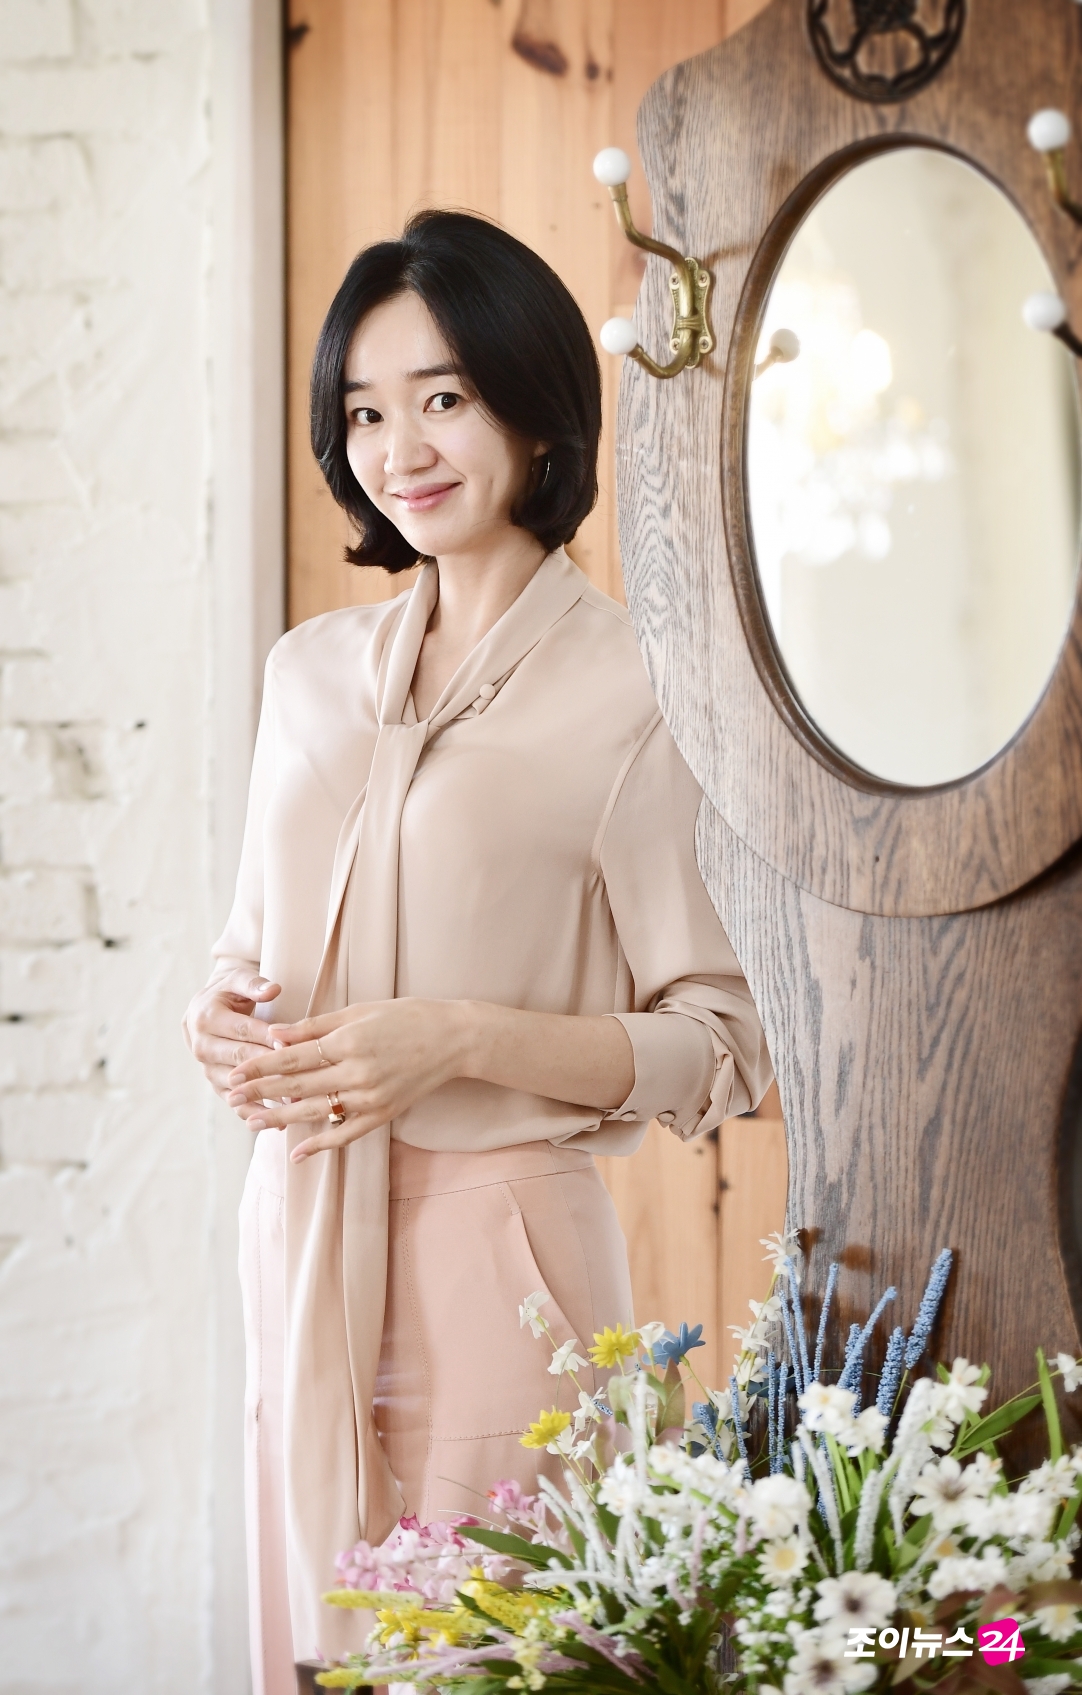 Actor Soo Ae of the movie High Society poses in an interview with him.Soo Ae played the role of Oh Soo-yeon, deputy director of the museum, who does not choose means and methods for his ambition to enter the High Society in High Society (director transformation).The release will be on the 29th.